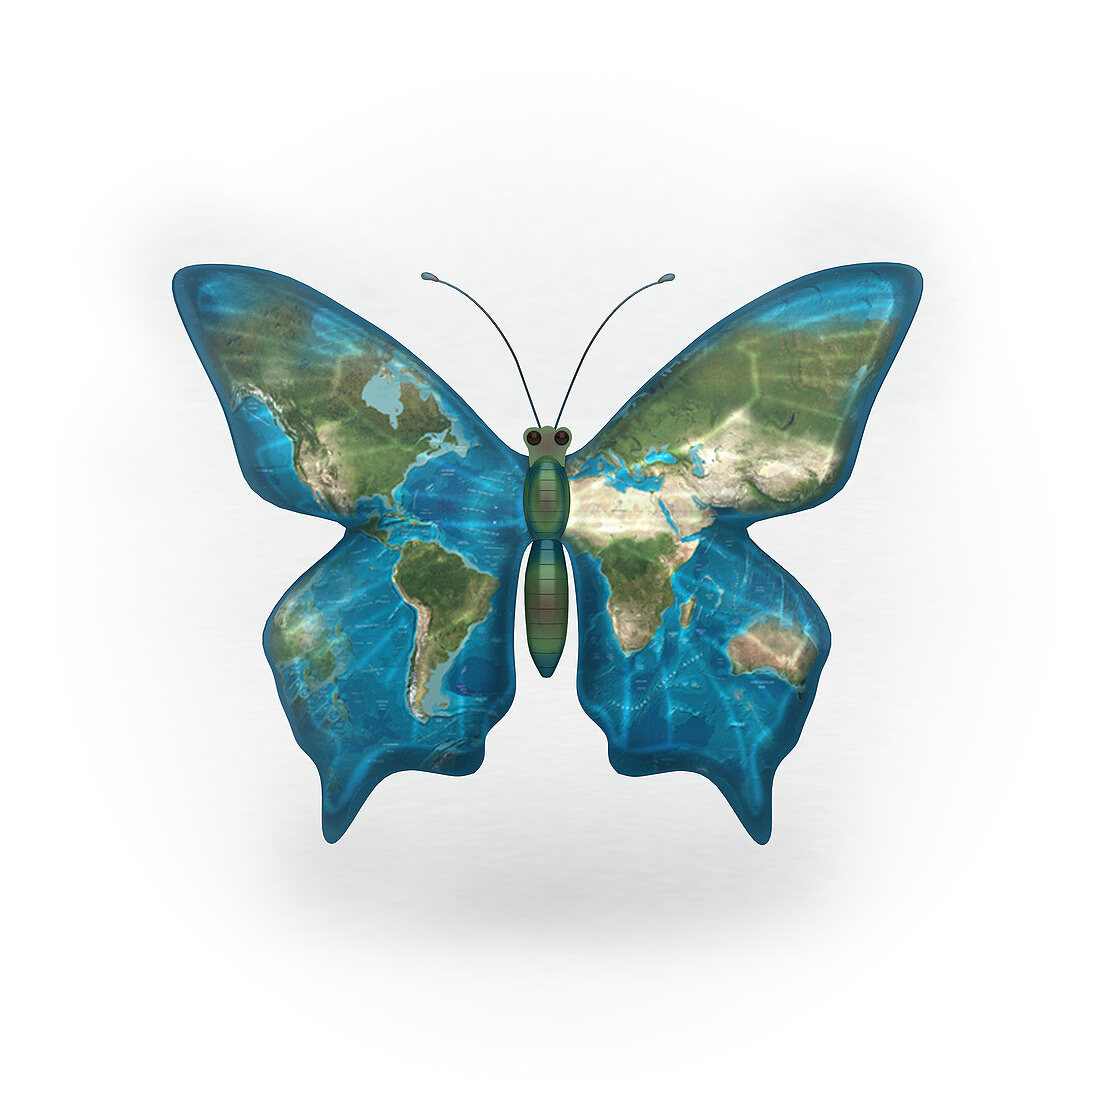 Butterfly with world map on its wings, illustration